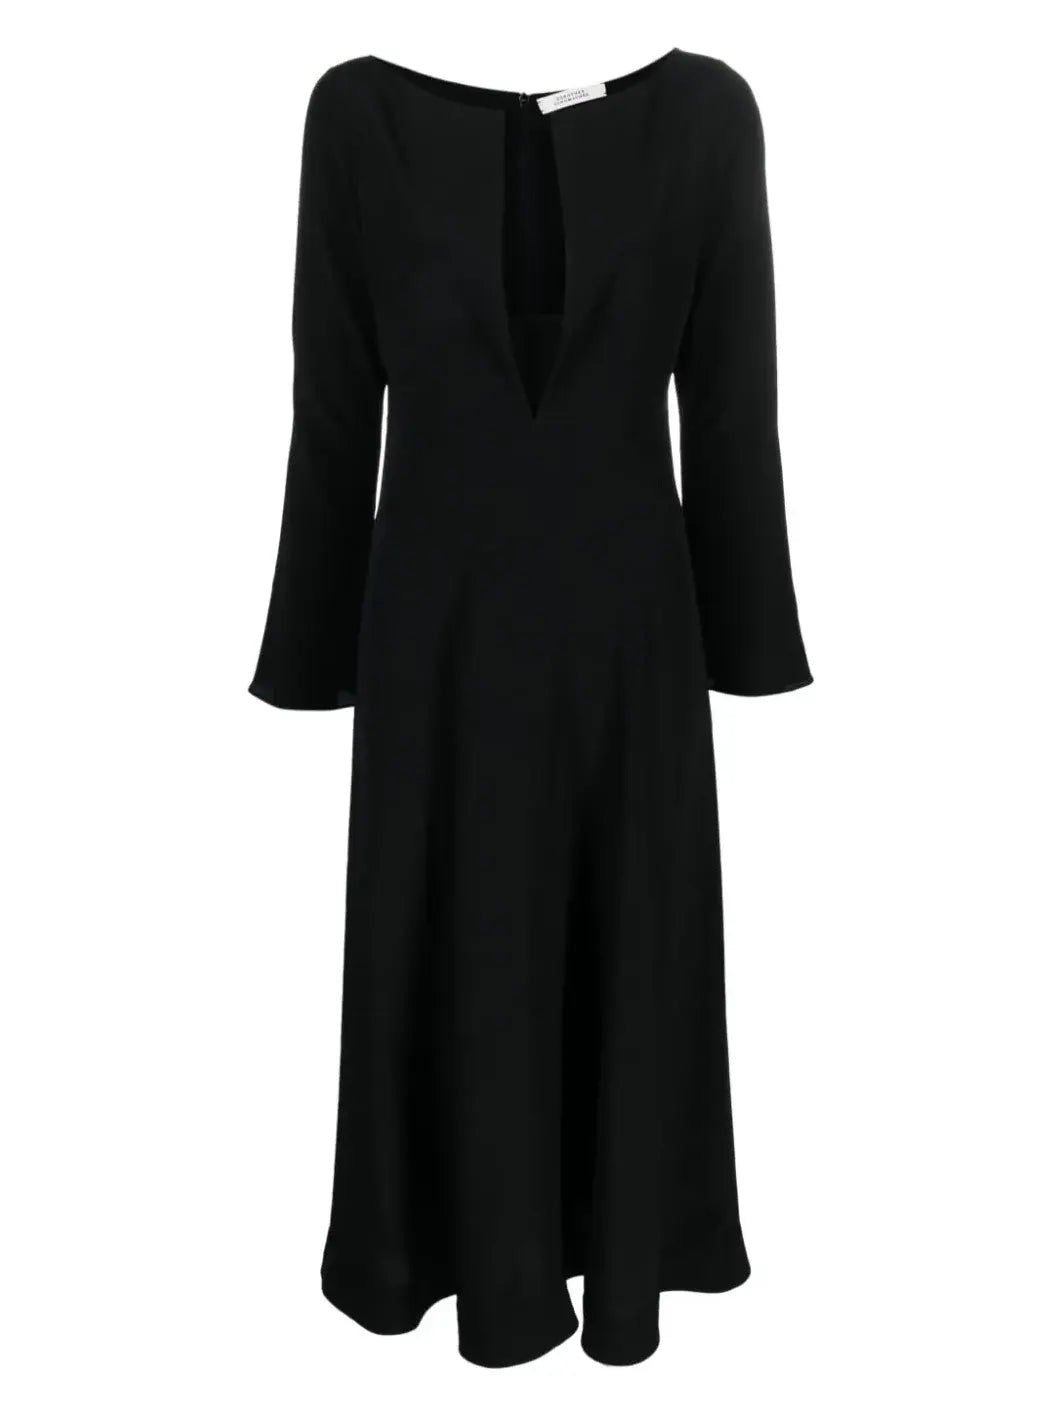 SOPHISTICATED VOLUMES dress, pure black